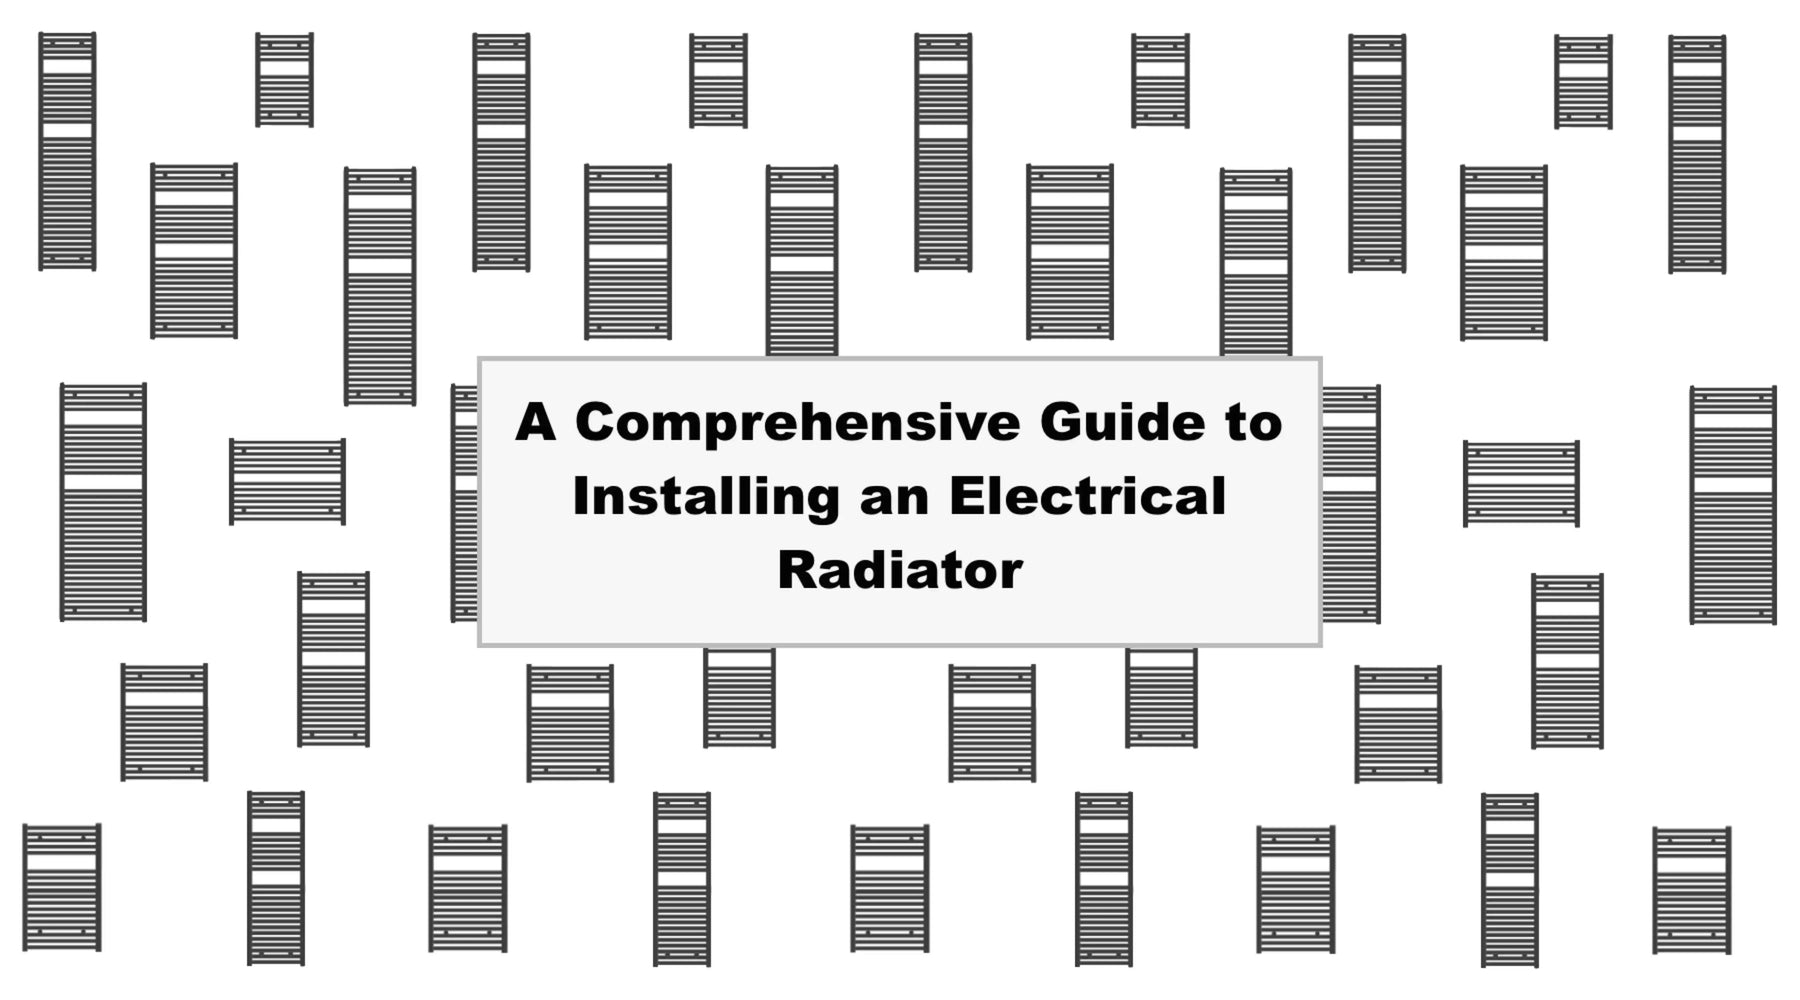 A Comprehensive Guide to Installing an Electrical Radiator